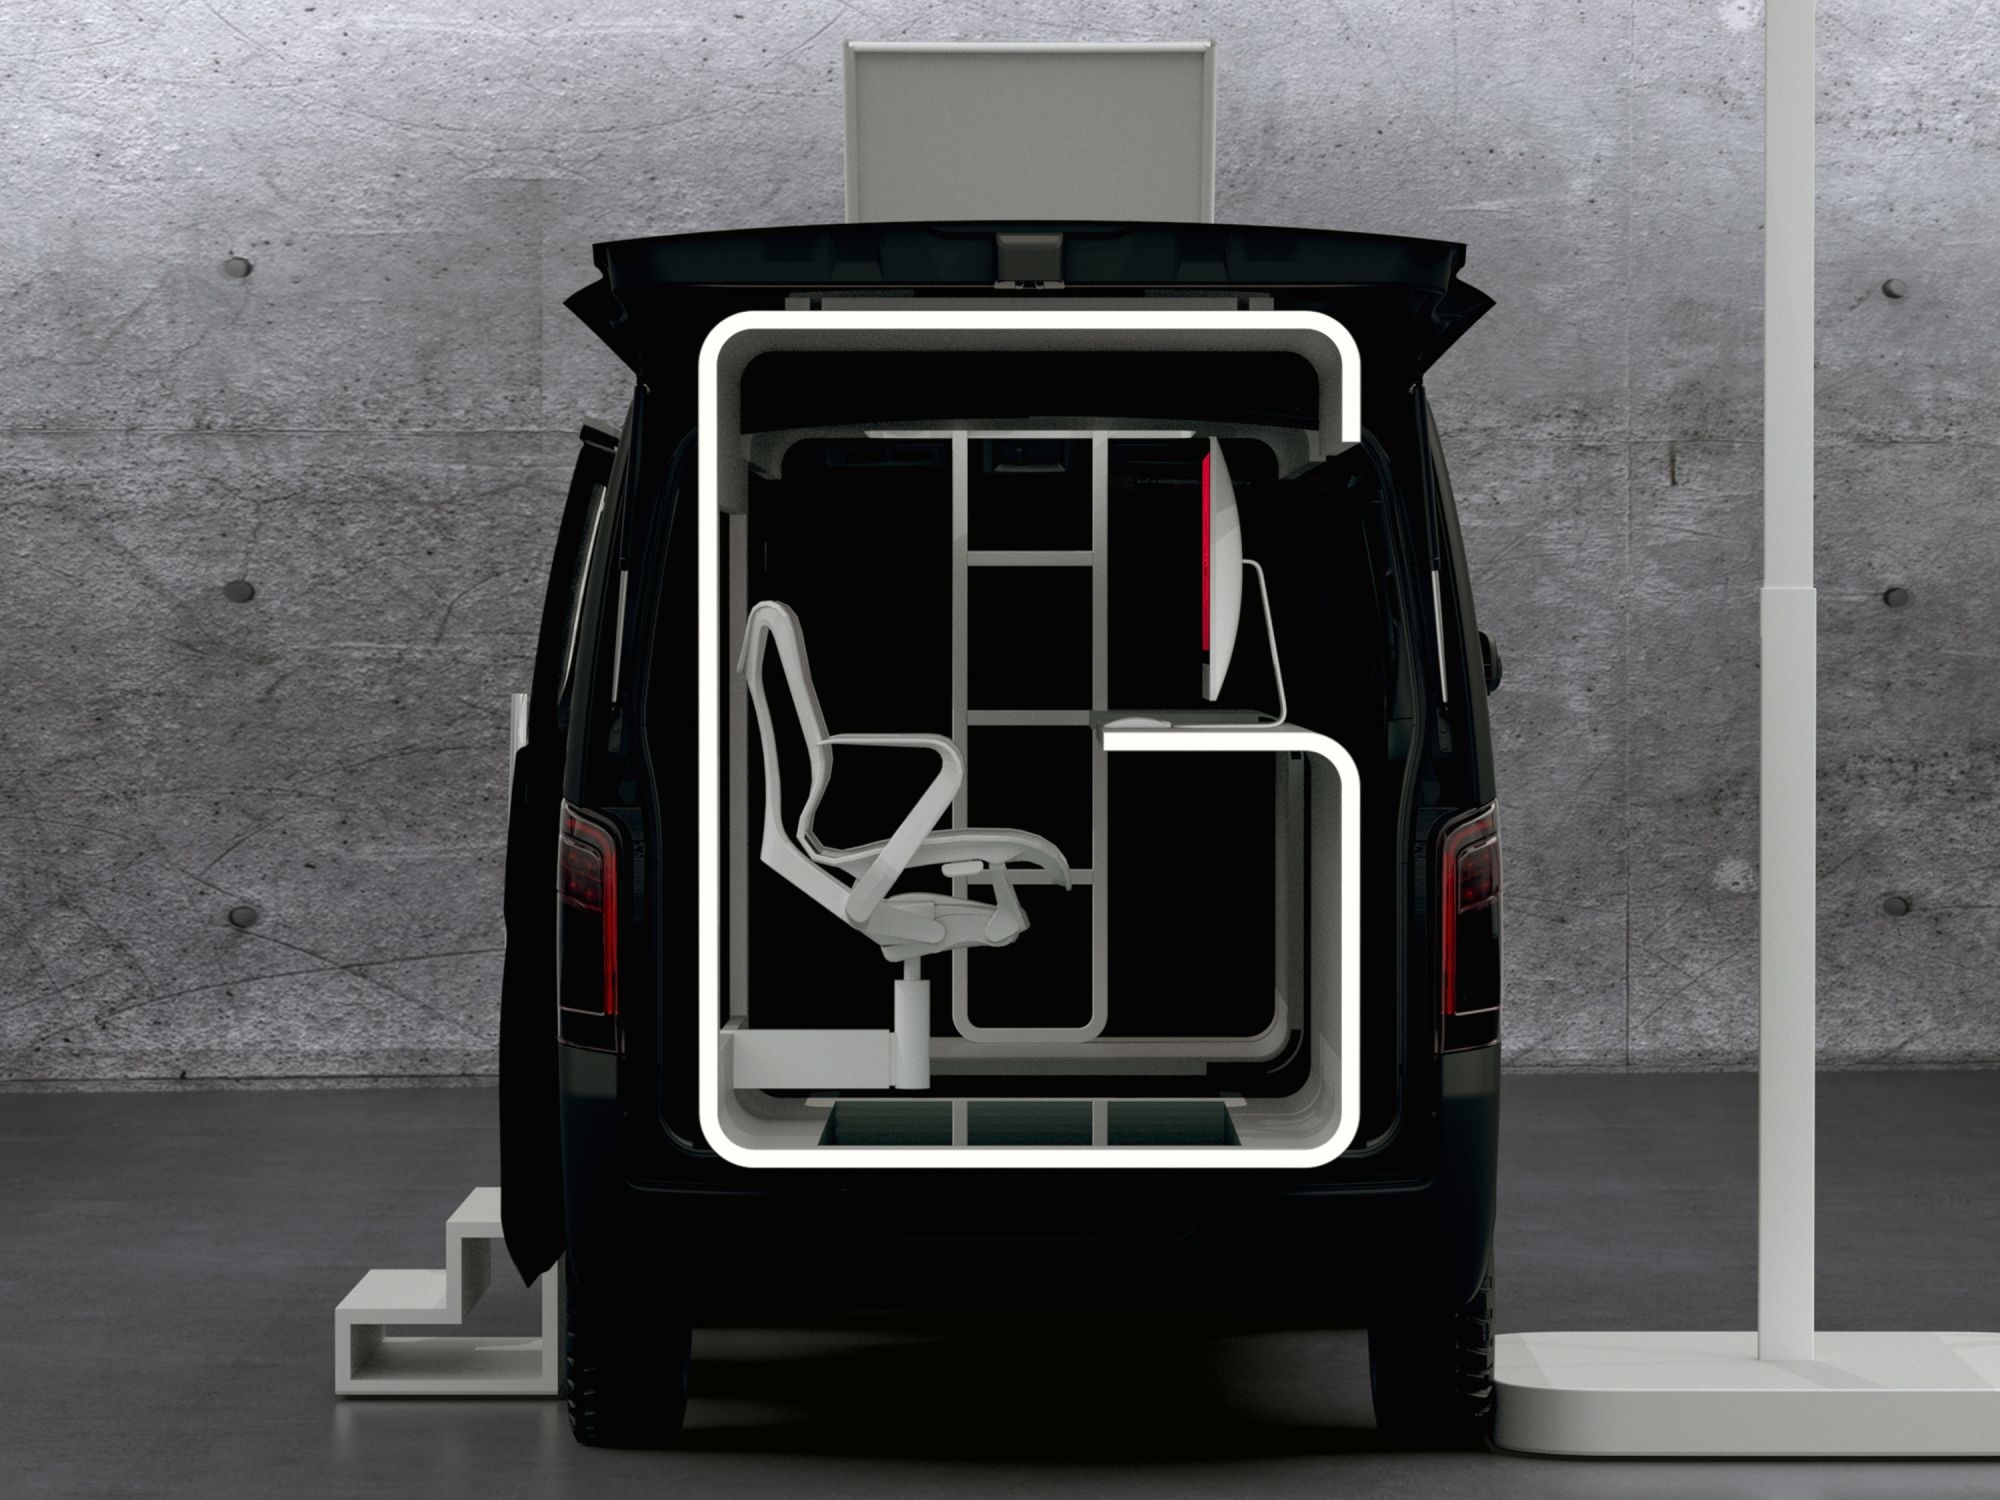 Nissan Used Camper Van Thinking to Create a Tiny Mobile Office